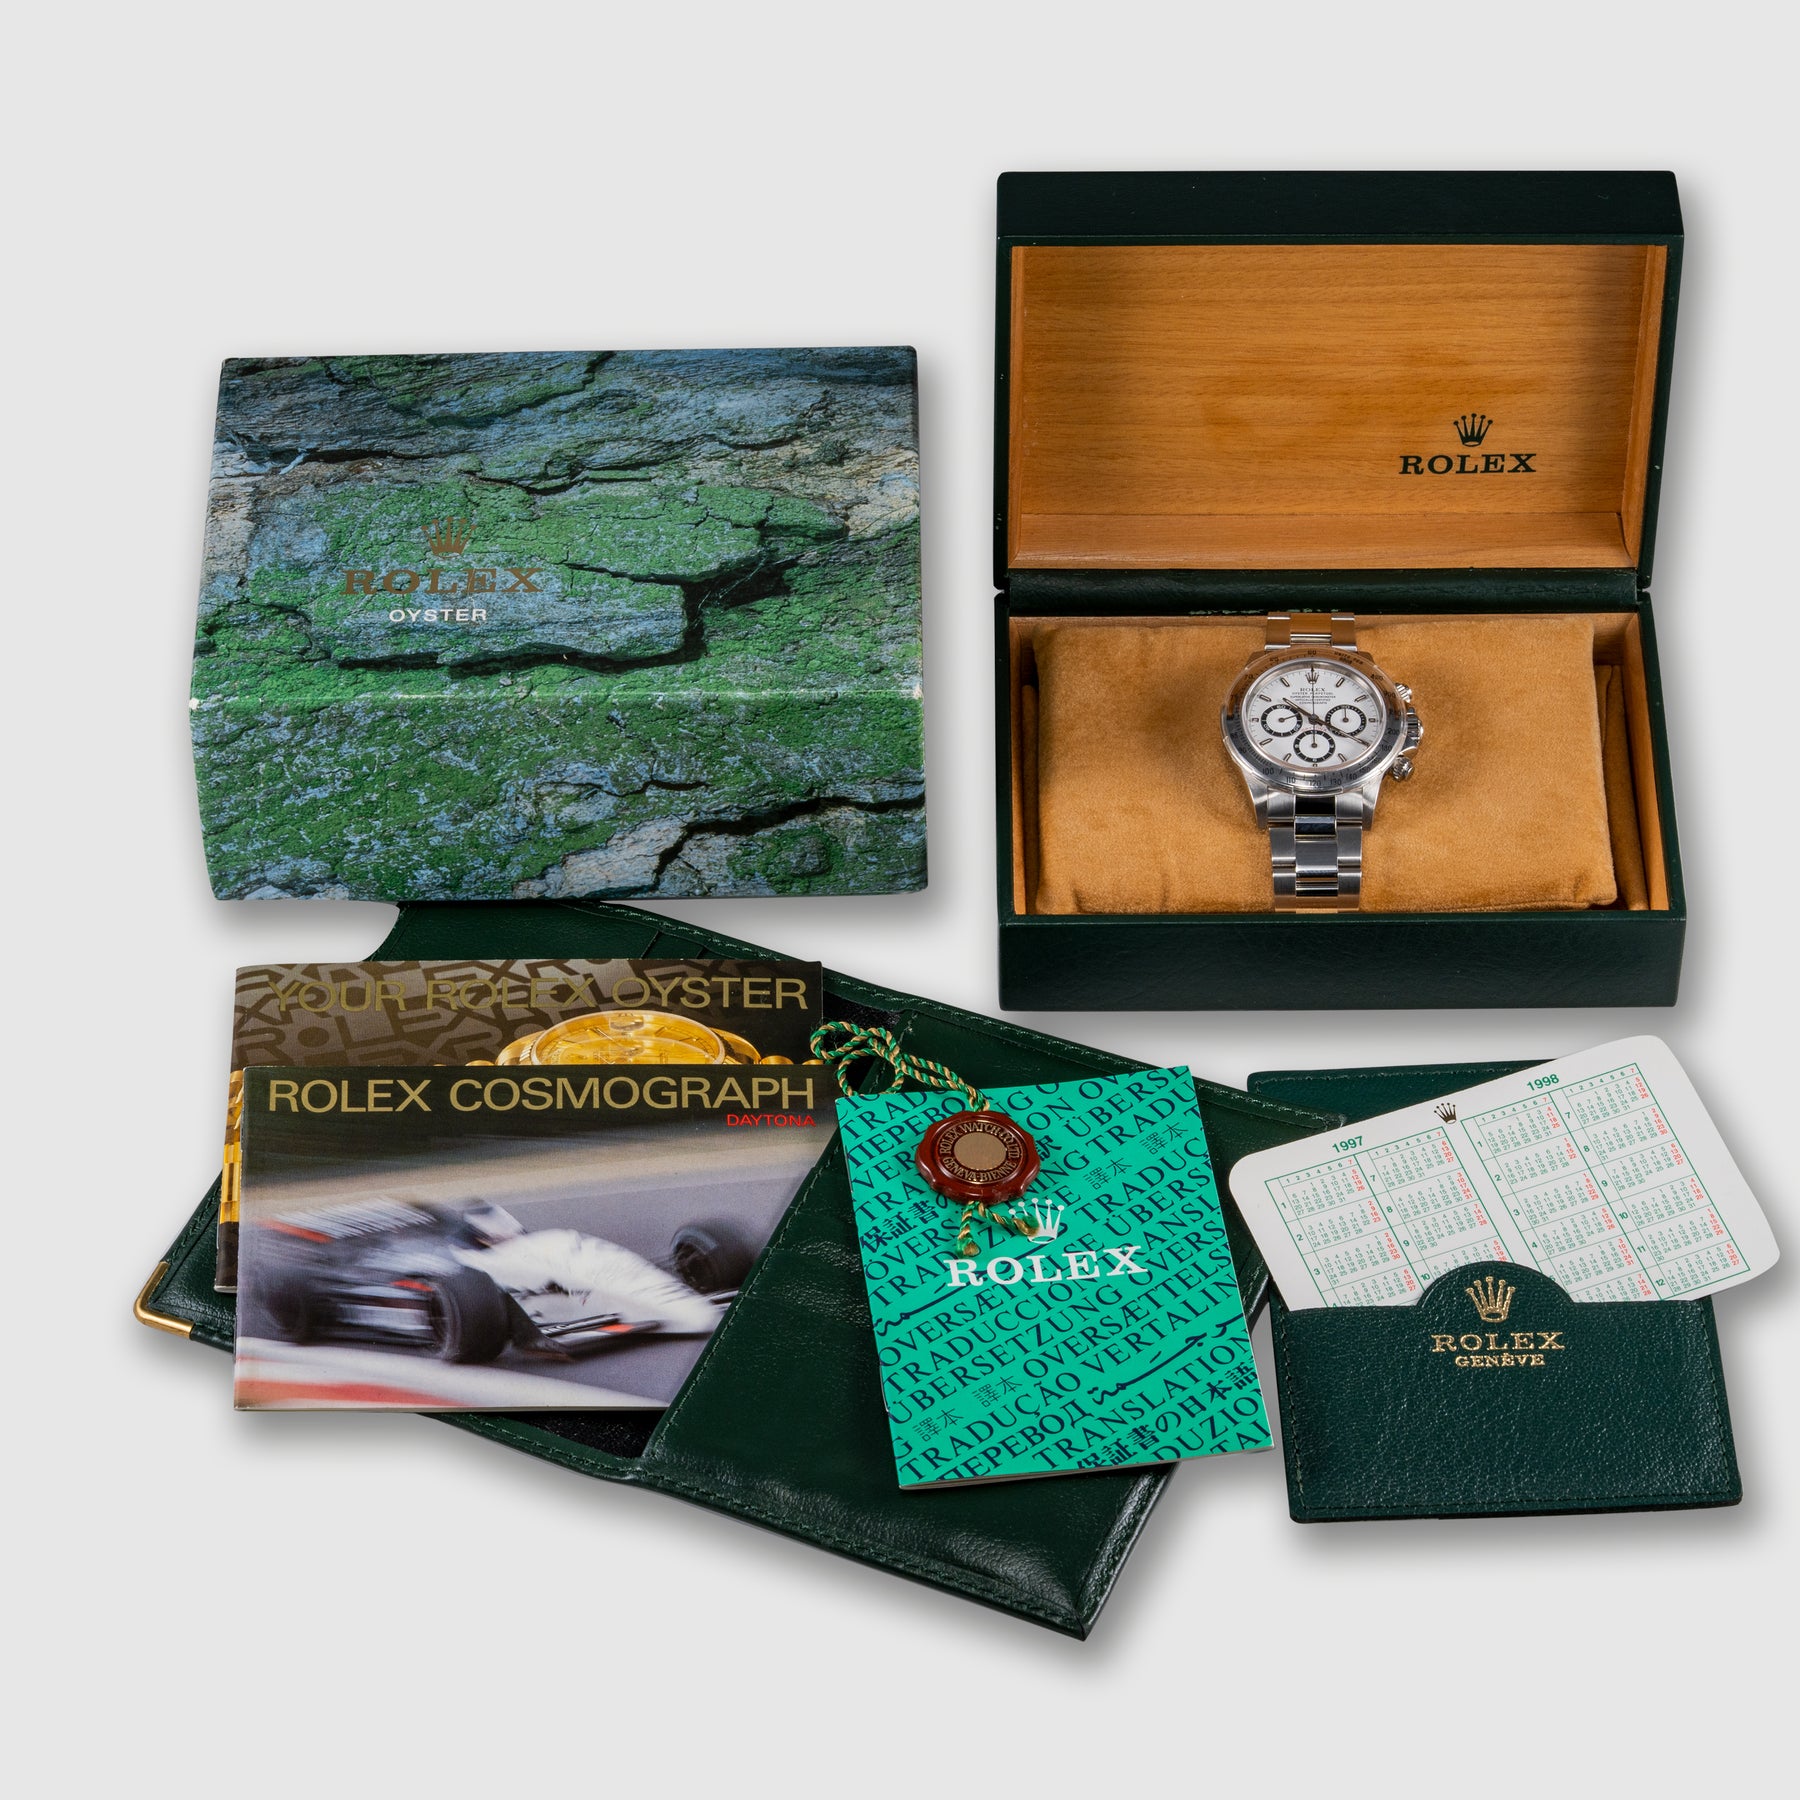 1997 Rolex Daytona White Dial New Old Stock Ref. 16520 (With Box and Booklets)